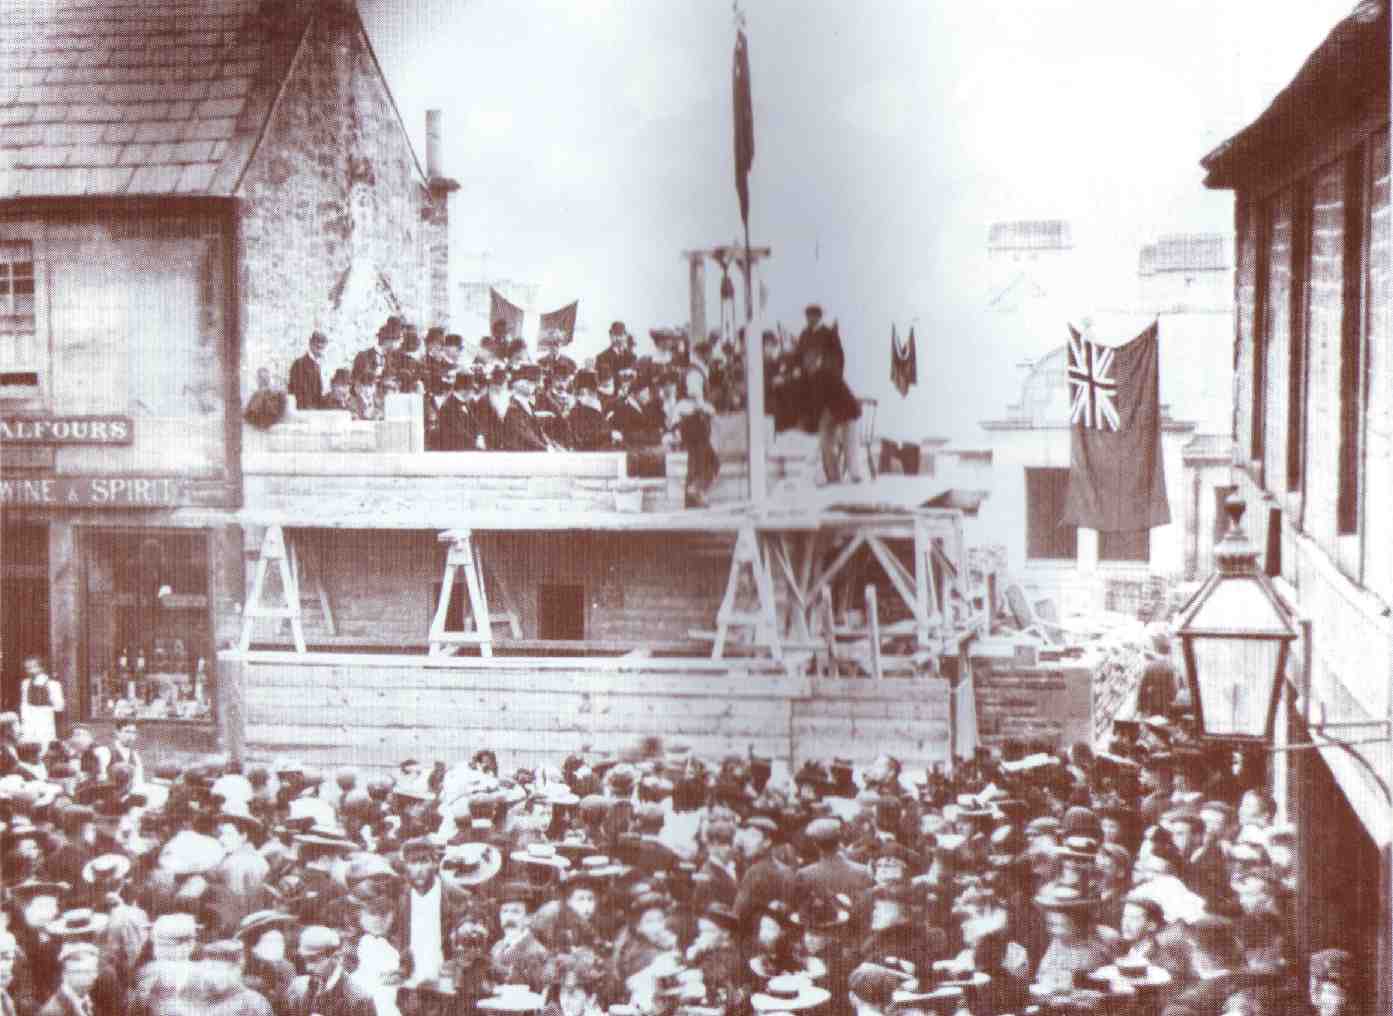 The Memorial Stone Laying Ceremony at the Thomas Hope Hospital on Monday 21st September 1896